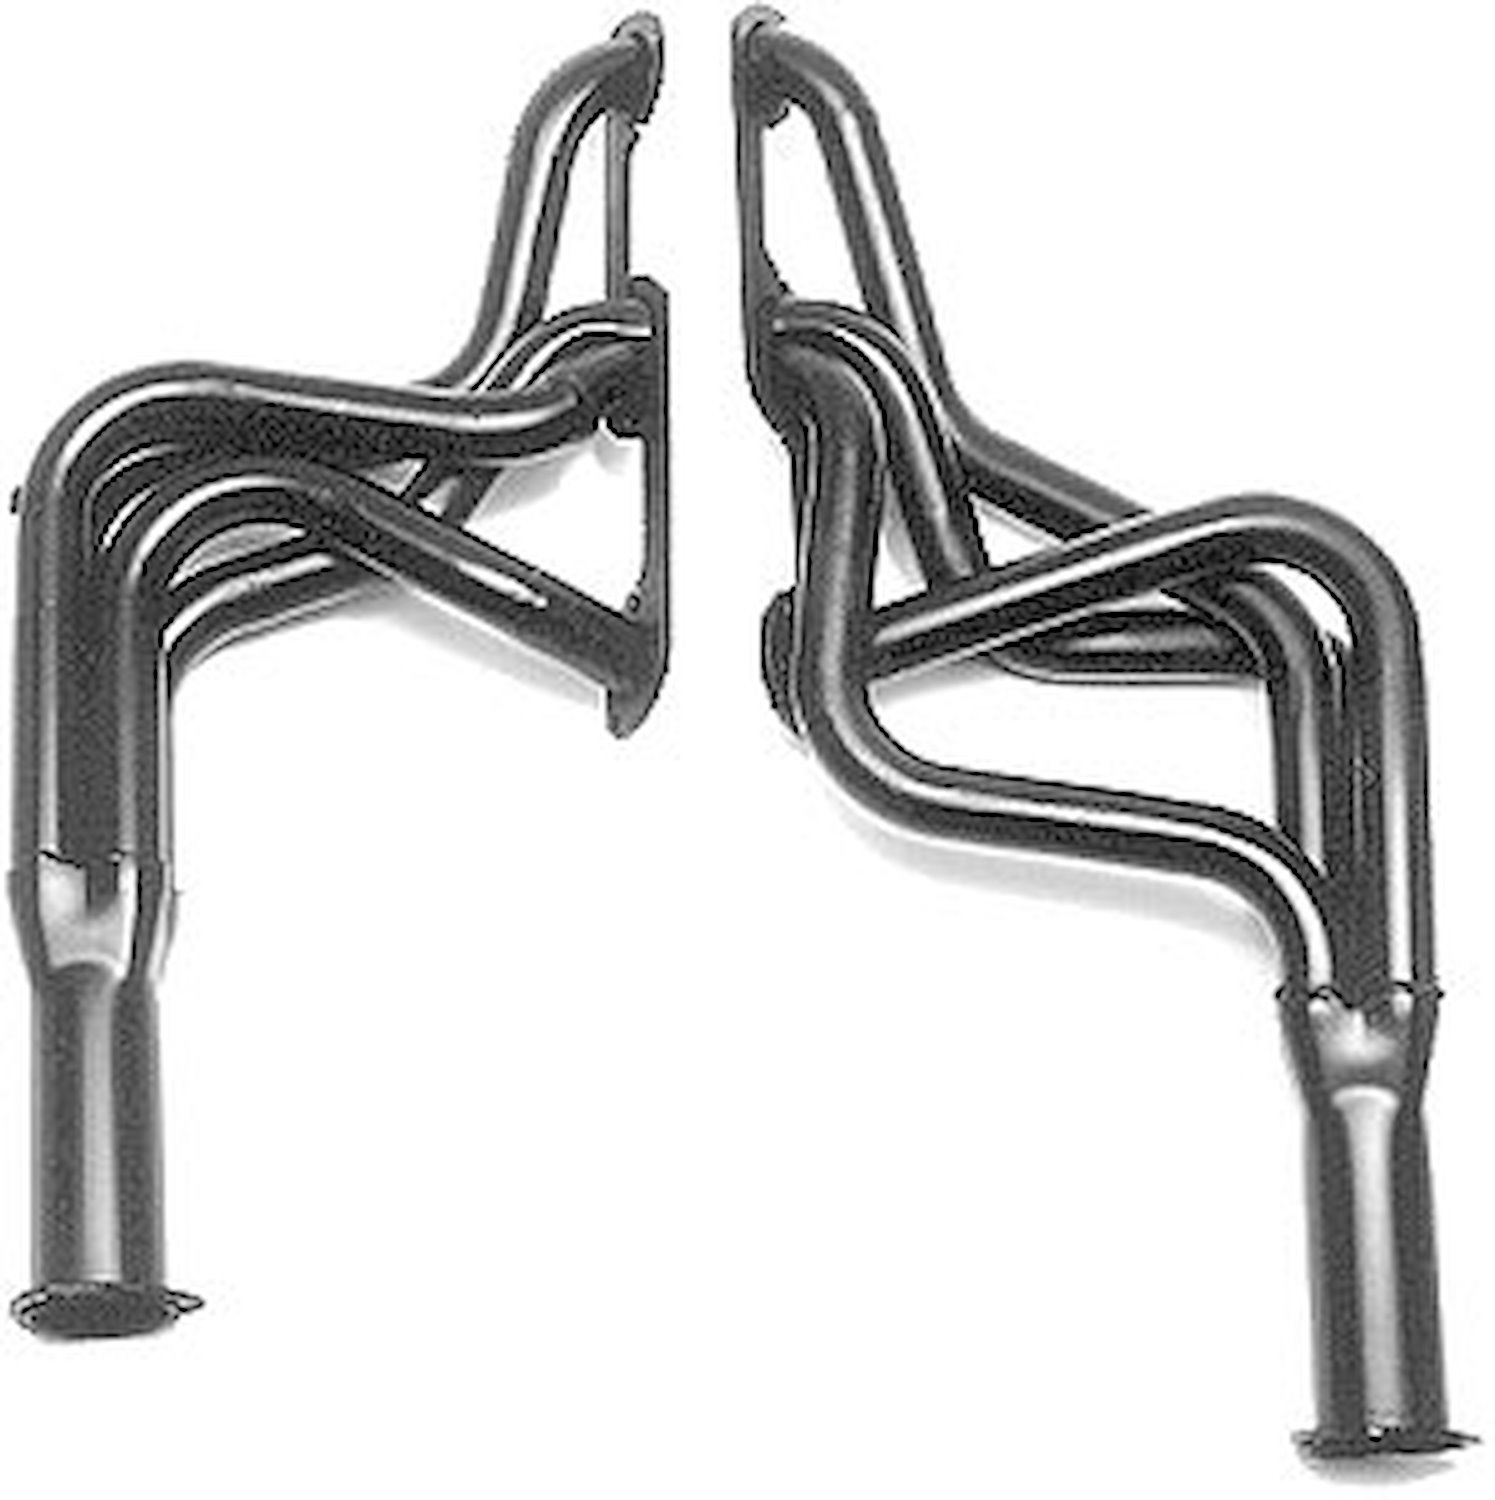 Standard Duty Uncoated Full Length Headers for 1970-79